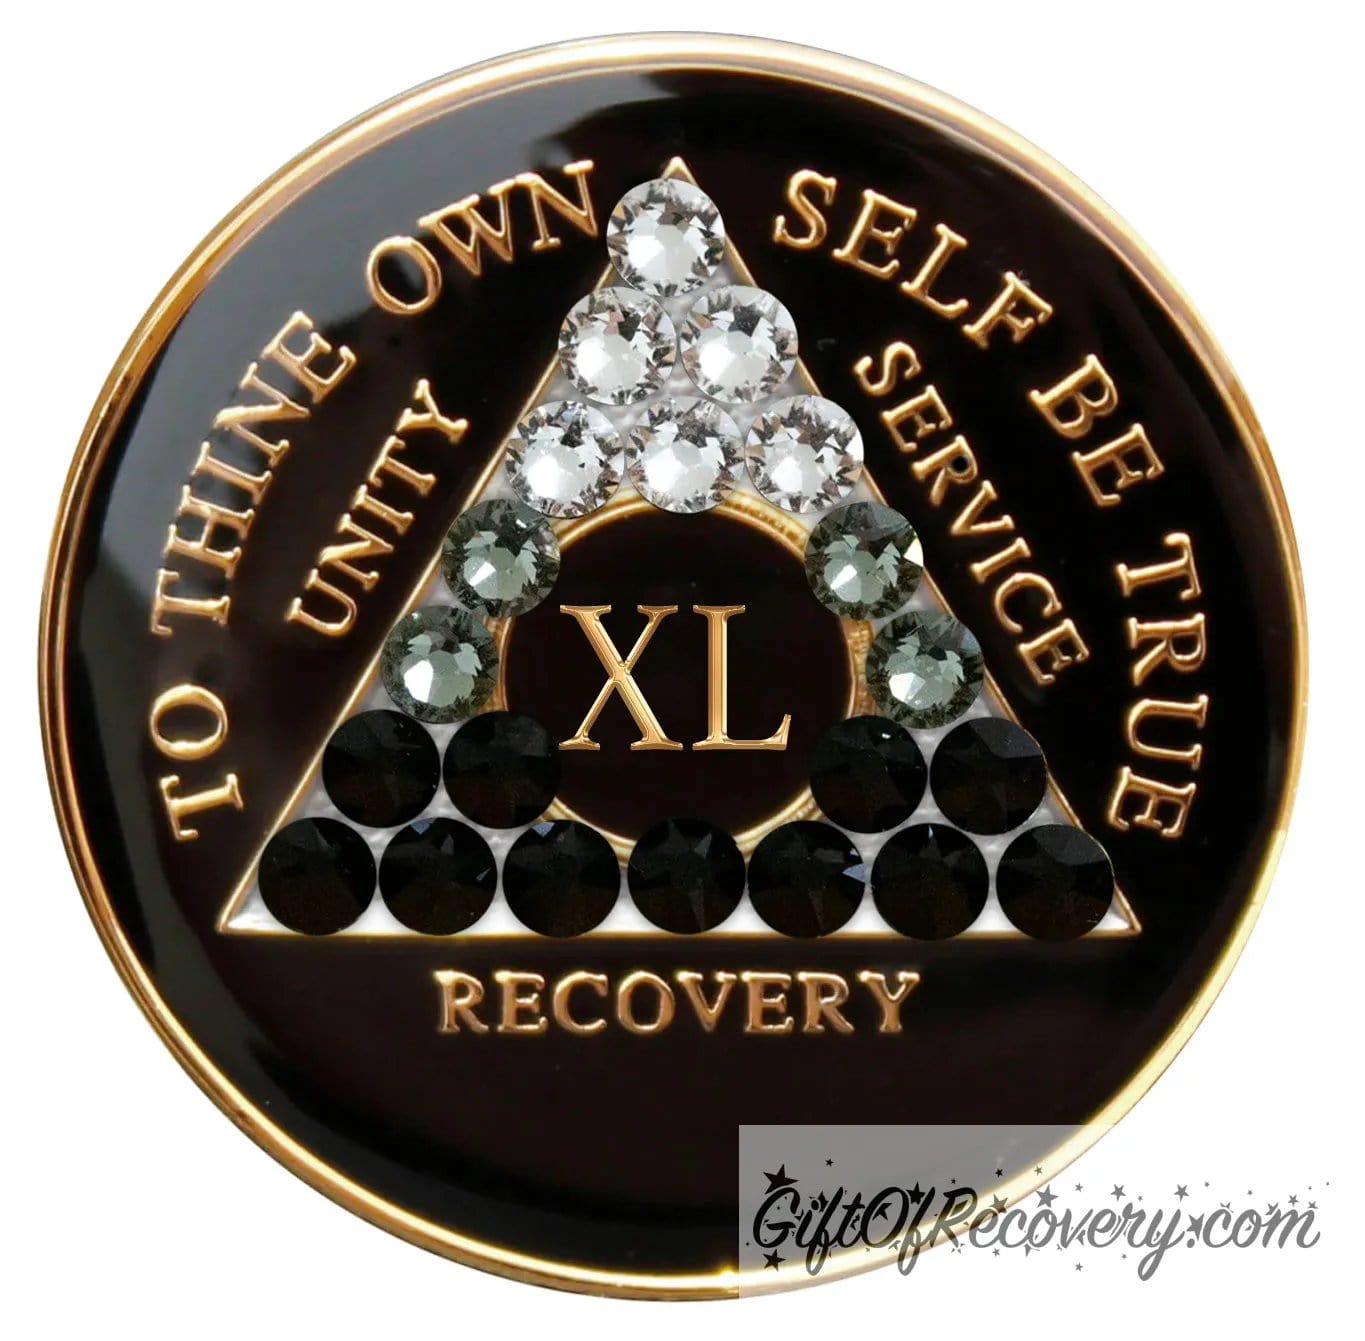 40 year AA recovery medallion black onyx with 21 genuine crystals ranging from clear to grey, to black, representing the transformation of the recovery journey, the AA moto along with unity, service, recovery, roman numeral, and the outer rim of medallion are embossed with 14k gold plated bras, the medallion is sealed in resin for a glossy finish.